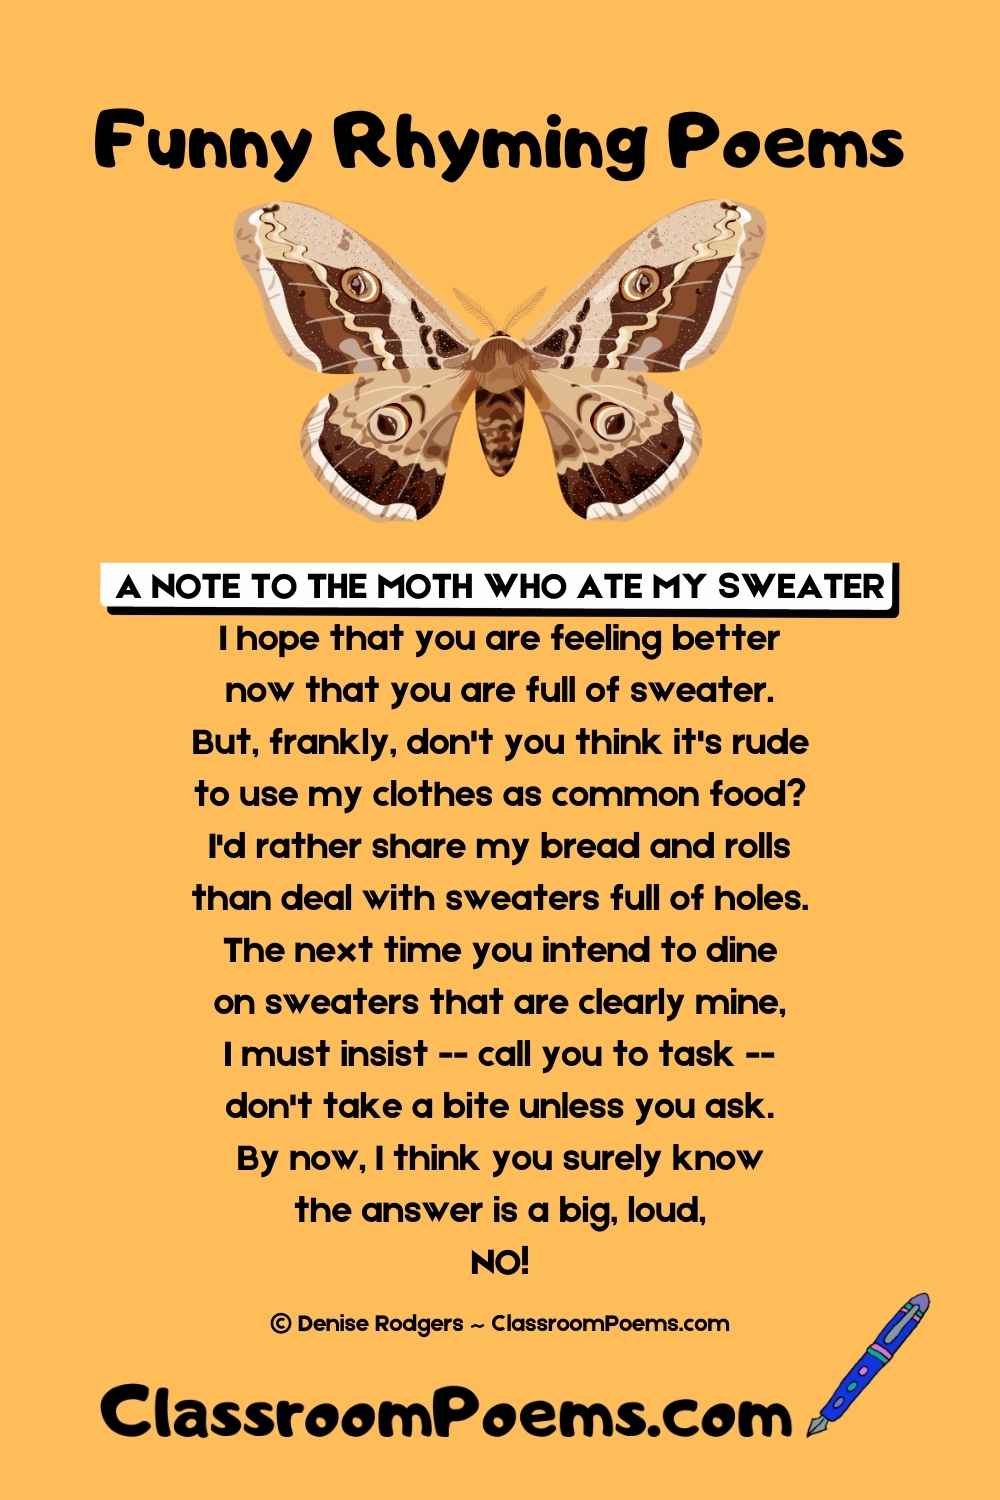 A NOTE TO THE MOTH WHO ATE MY SWEATER, a funny rhyming poem by Denise  Rodgers on ClassroomPoems.com.